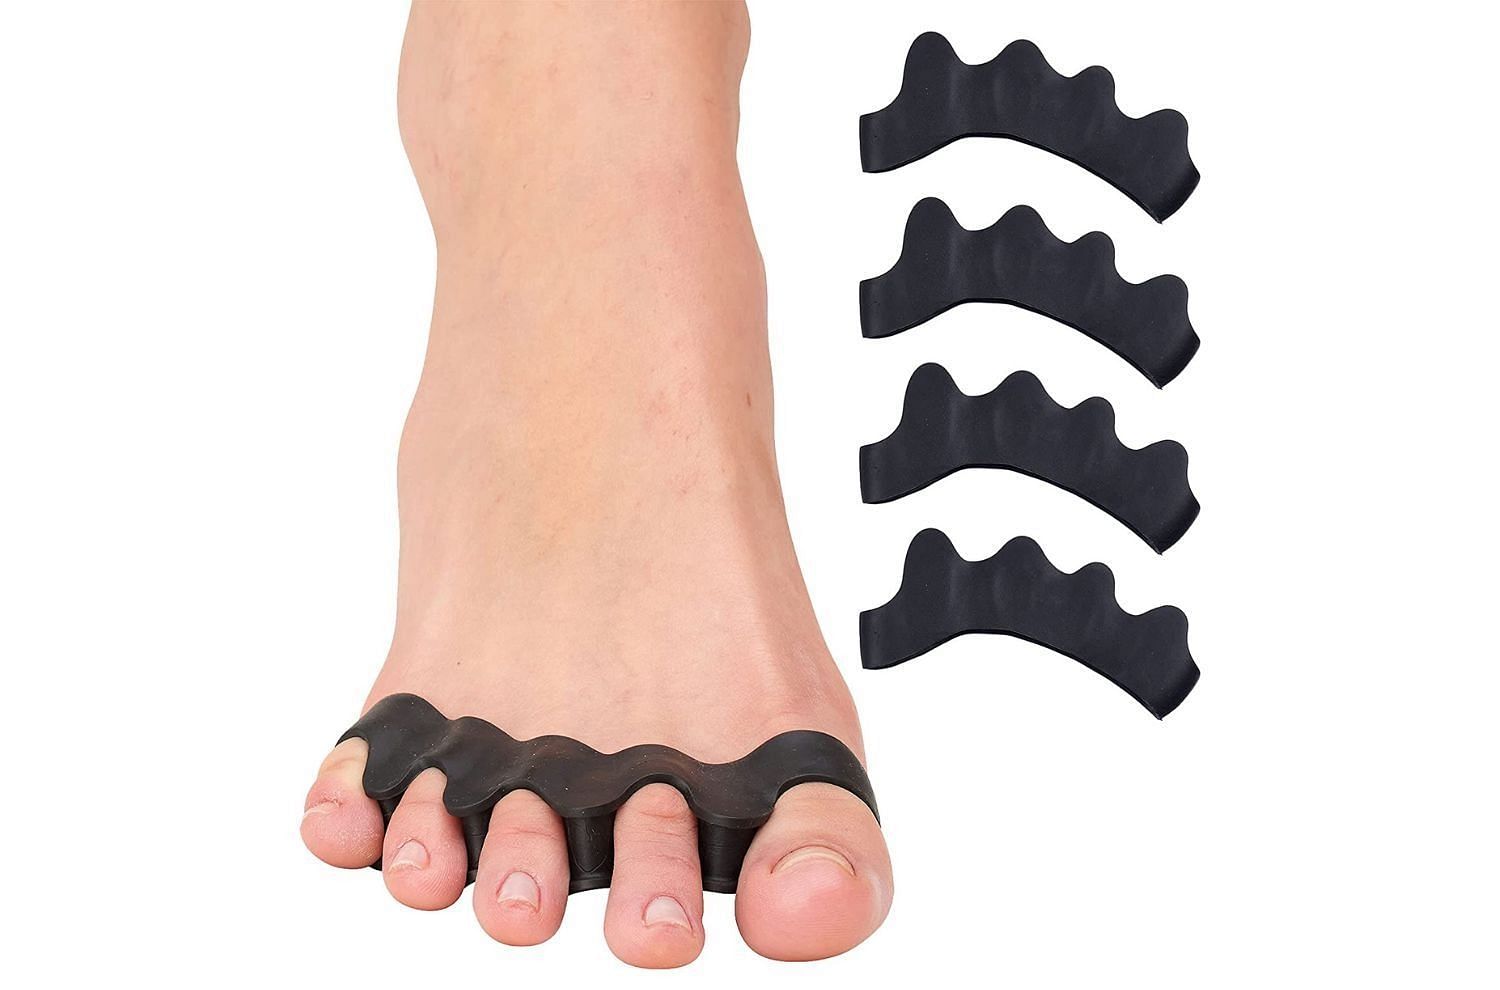 Toe spacers (Image via Getty Images)